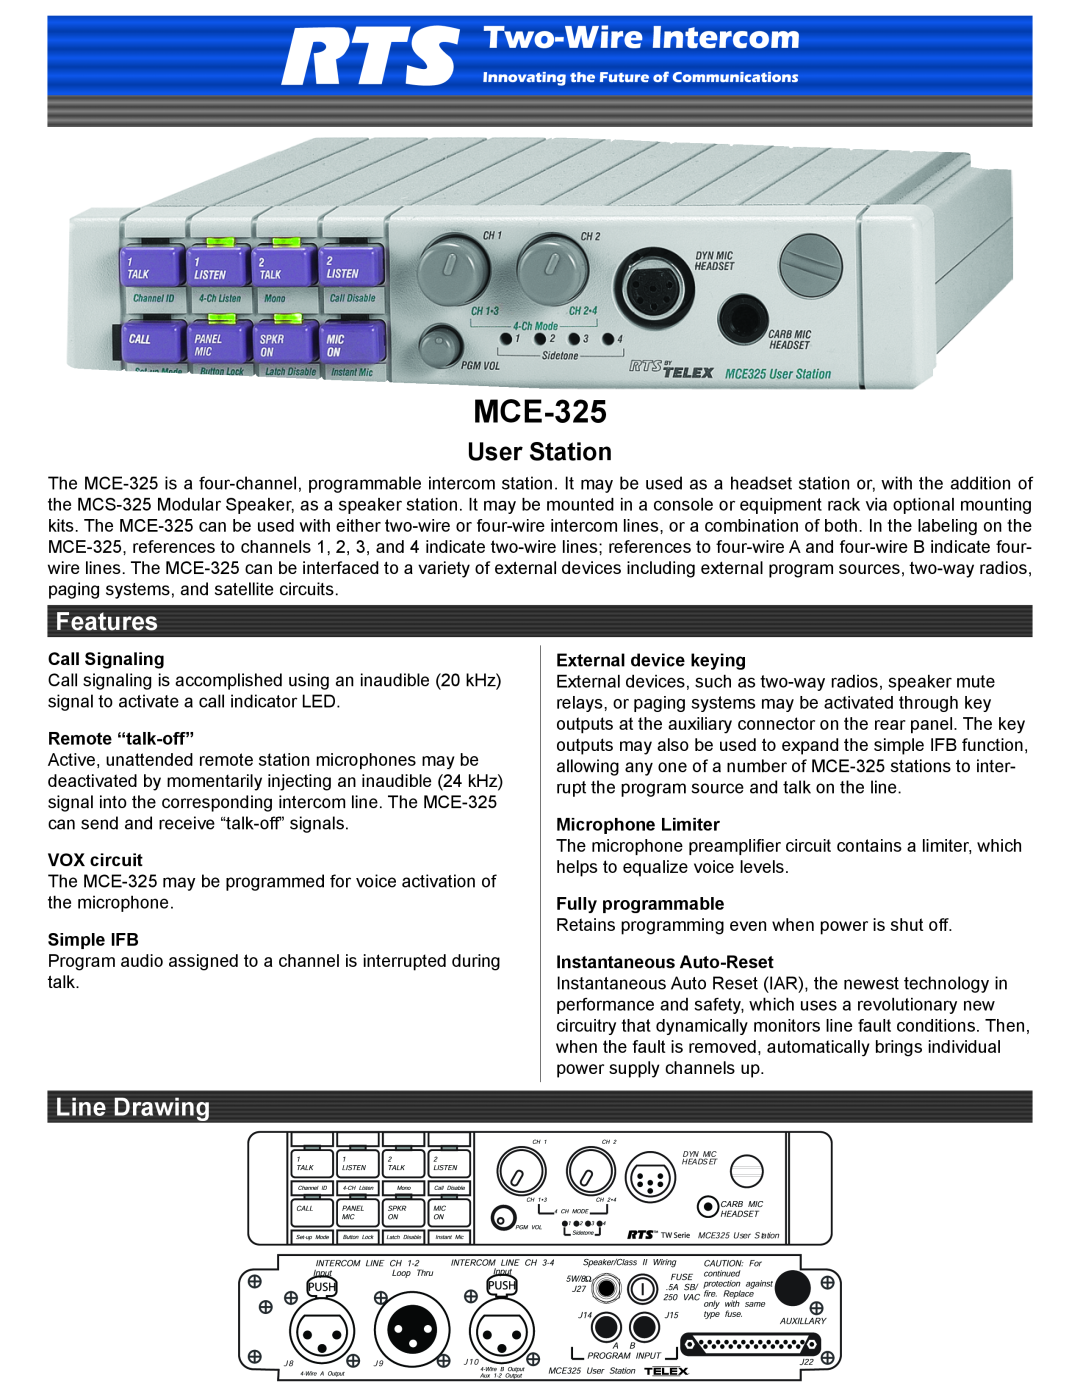 RTS MCE-325 manual Call Signaling, Remote “talk-off”, VOX circuit, Simple IFB, External device keying, Microphone Limiter 